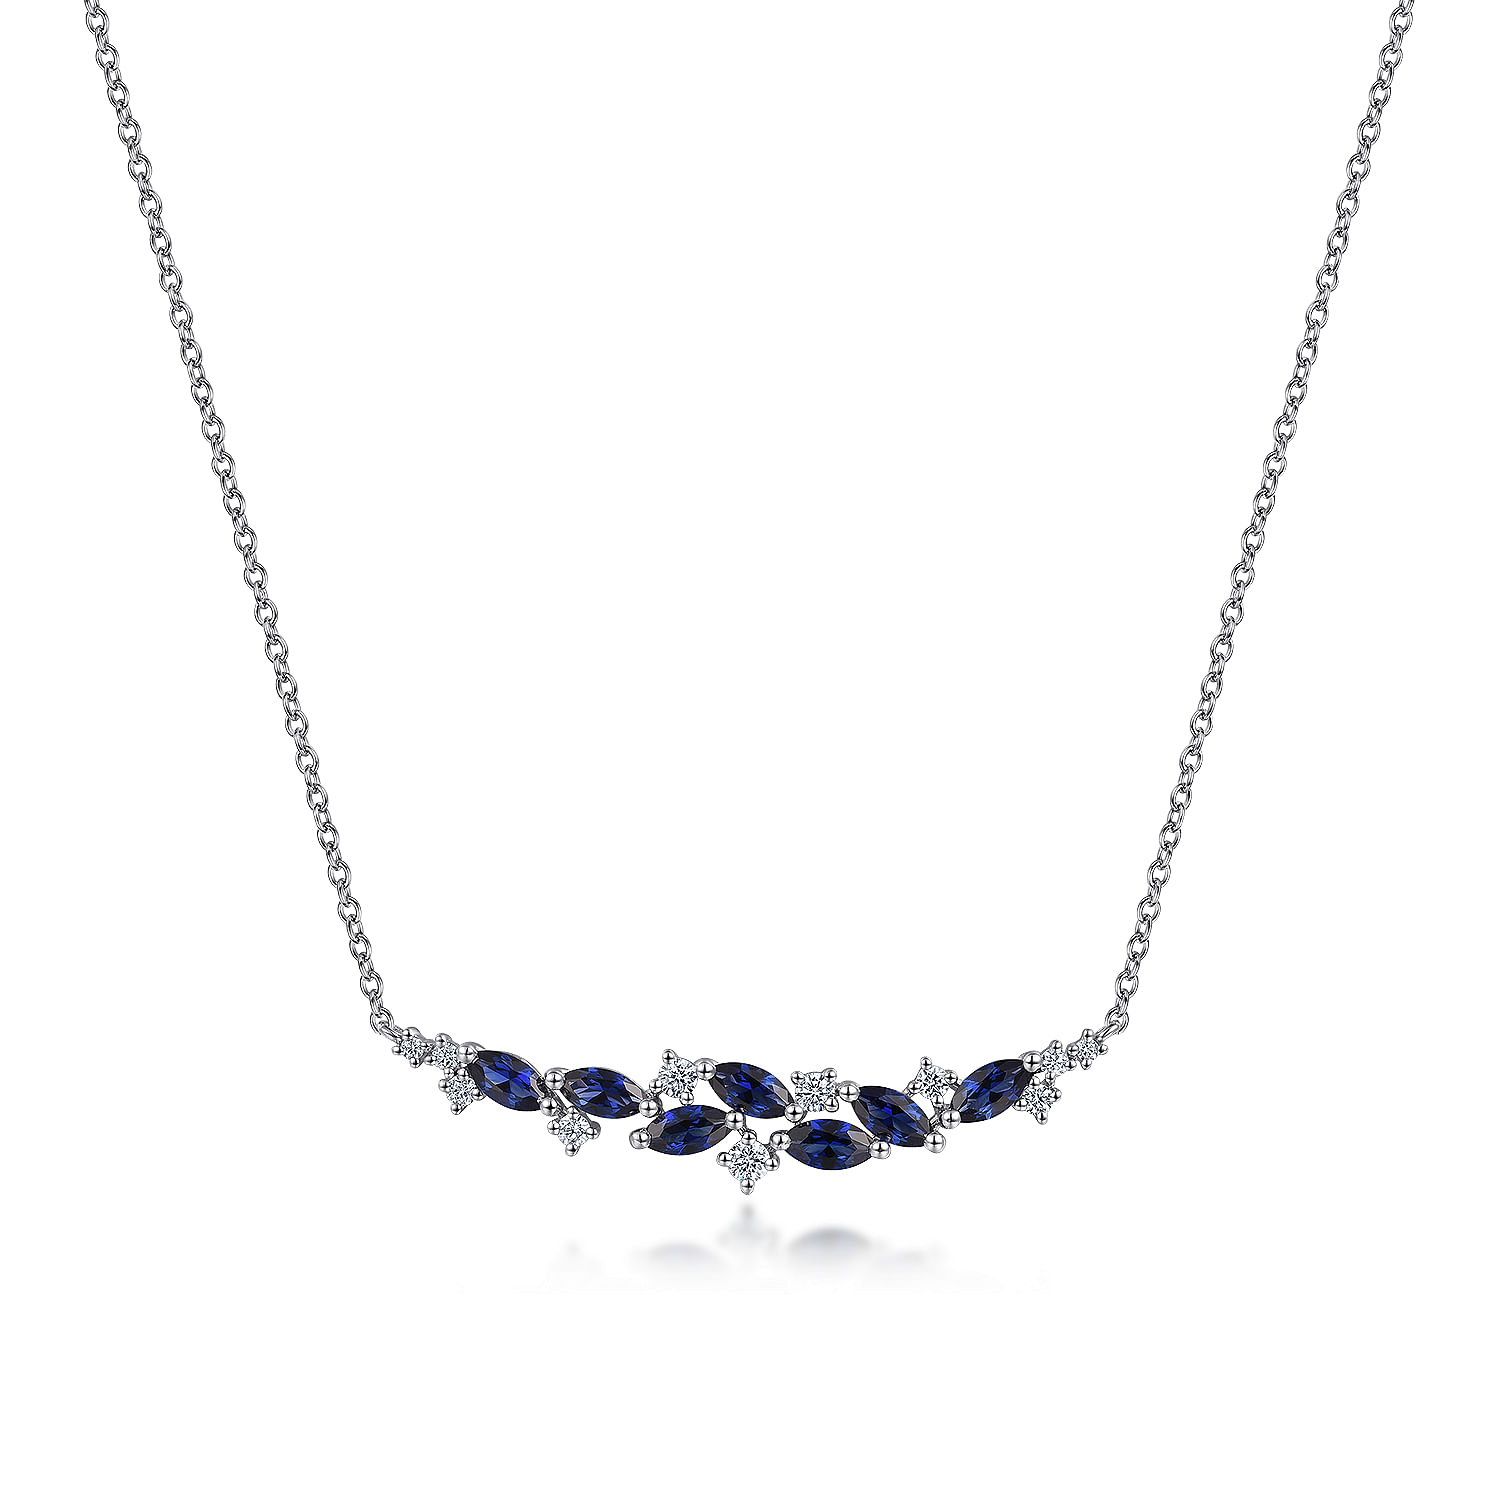 14K White Gold Diamond and Marquise Blue Sapphire Bar Necklace